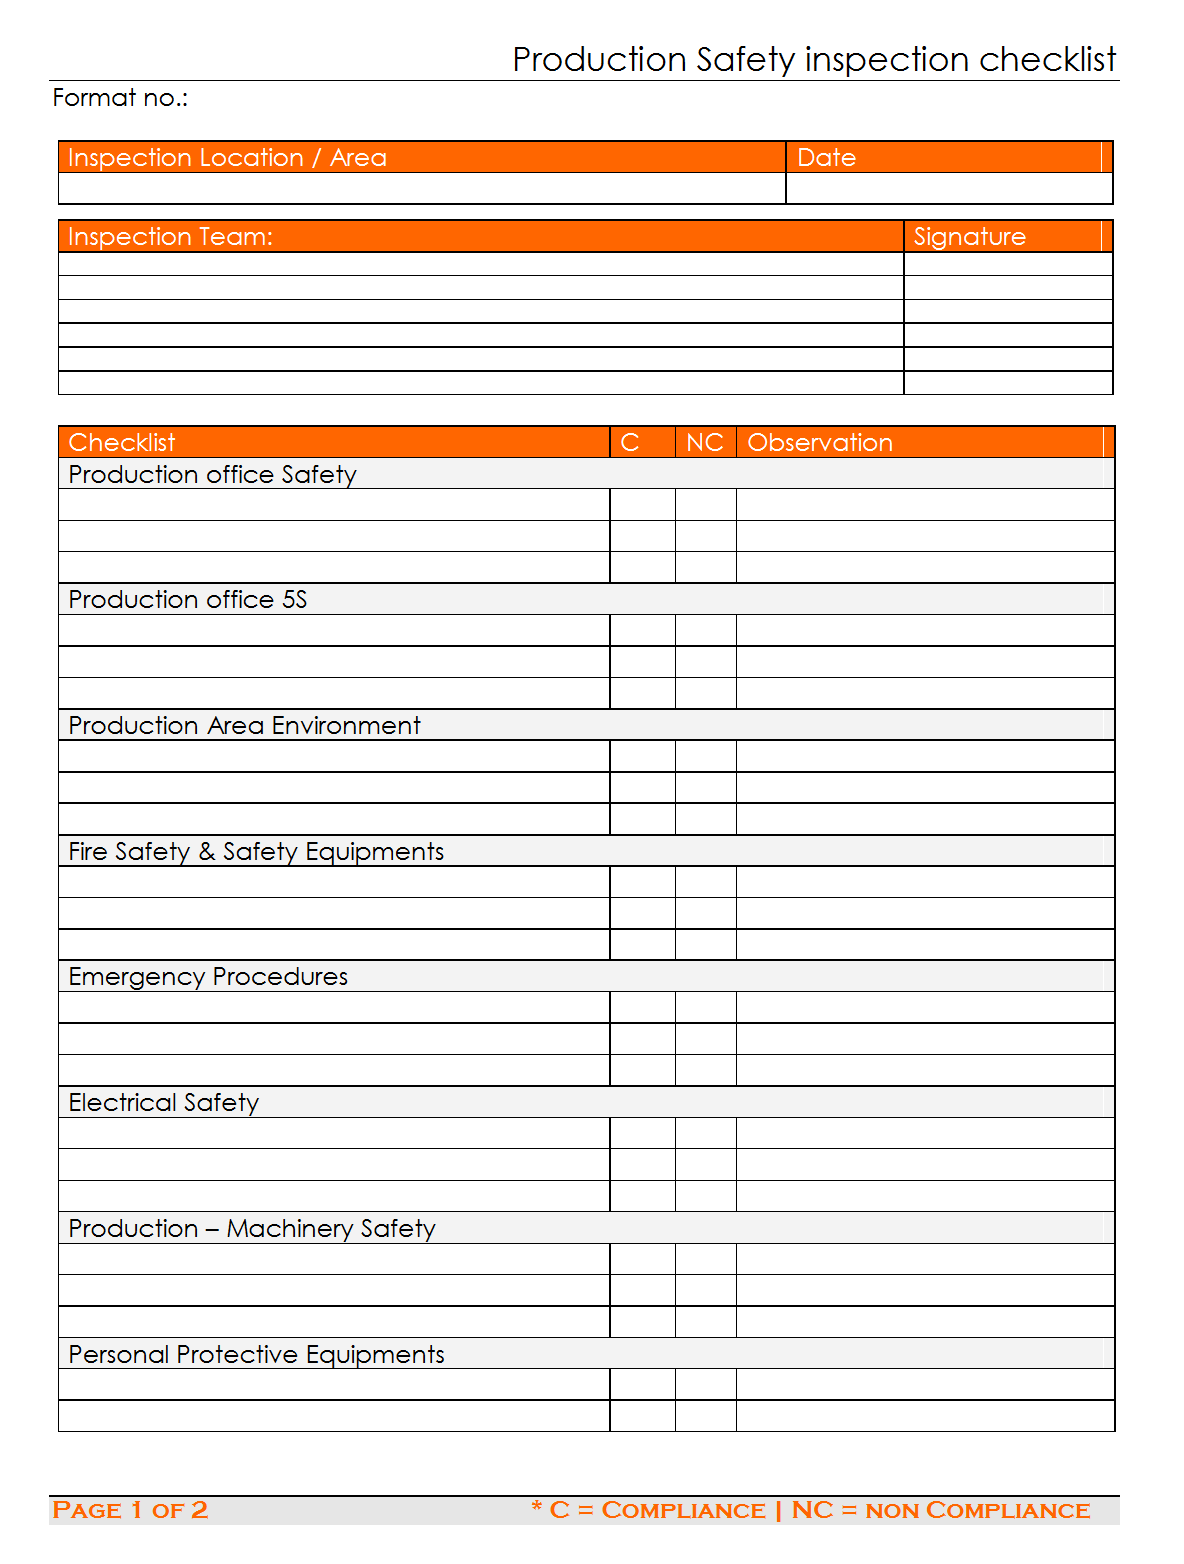 Production Safety Inspection Checklist Template Throughout Office Safety Checklist Template